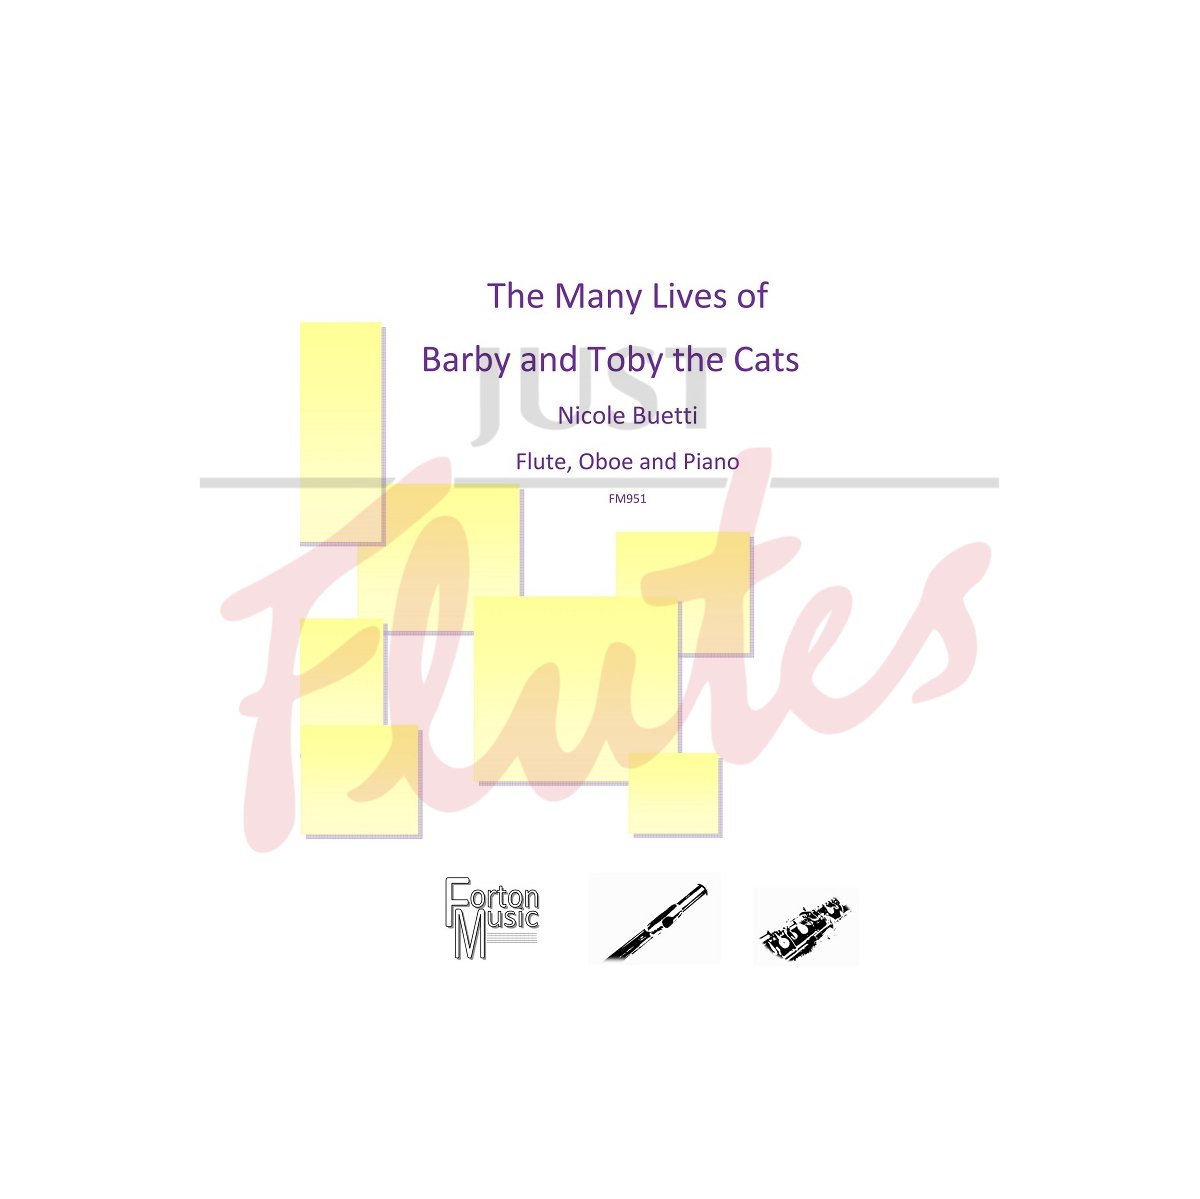 The Many Lives of Barby and Toby the Cats [Flute, Oboe and Piano]